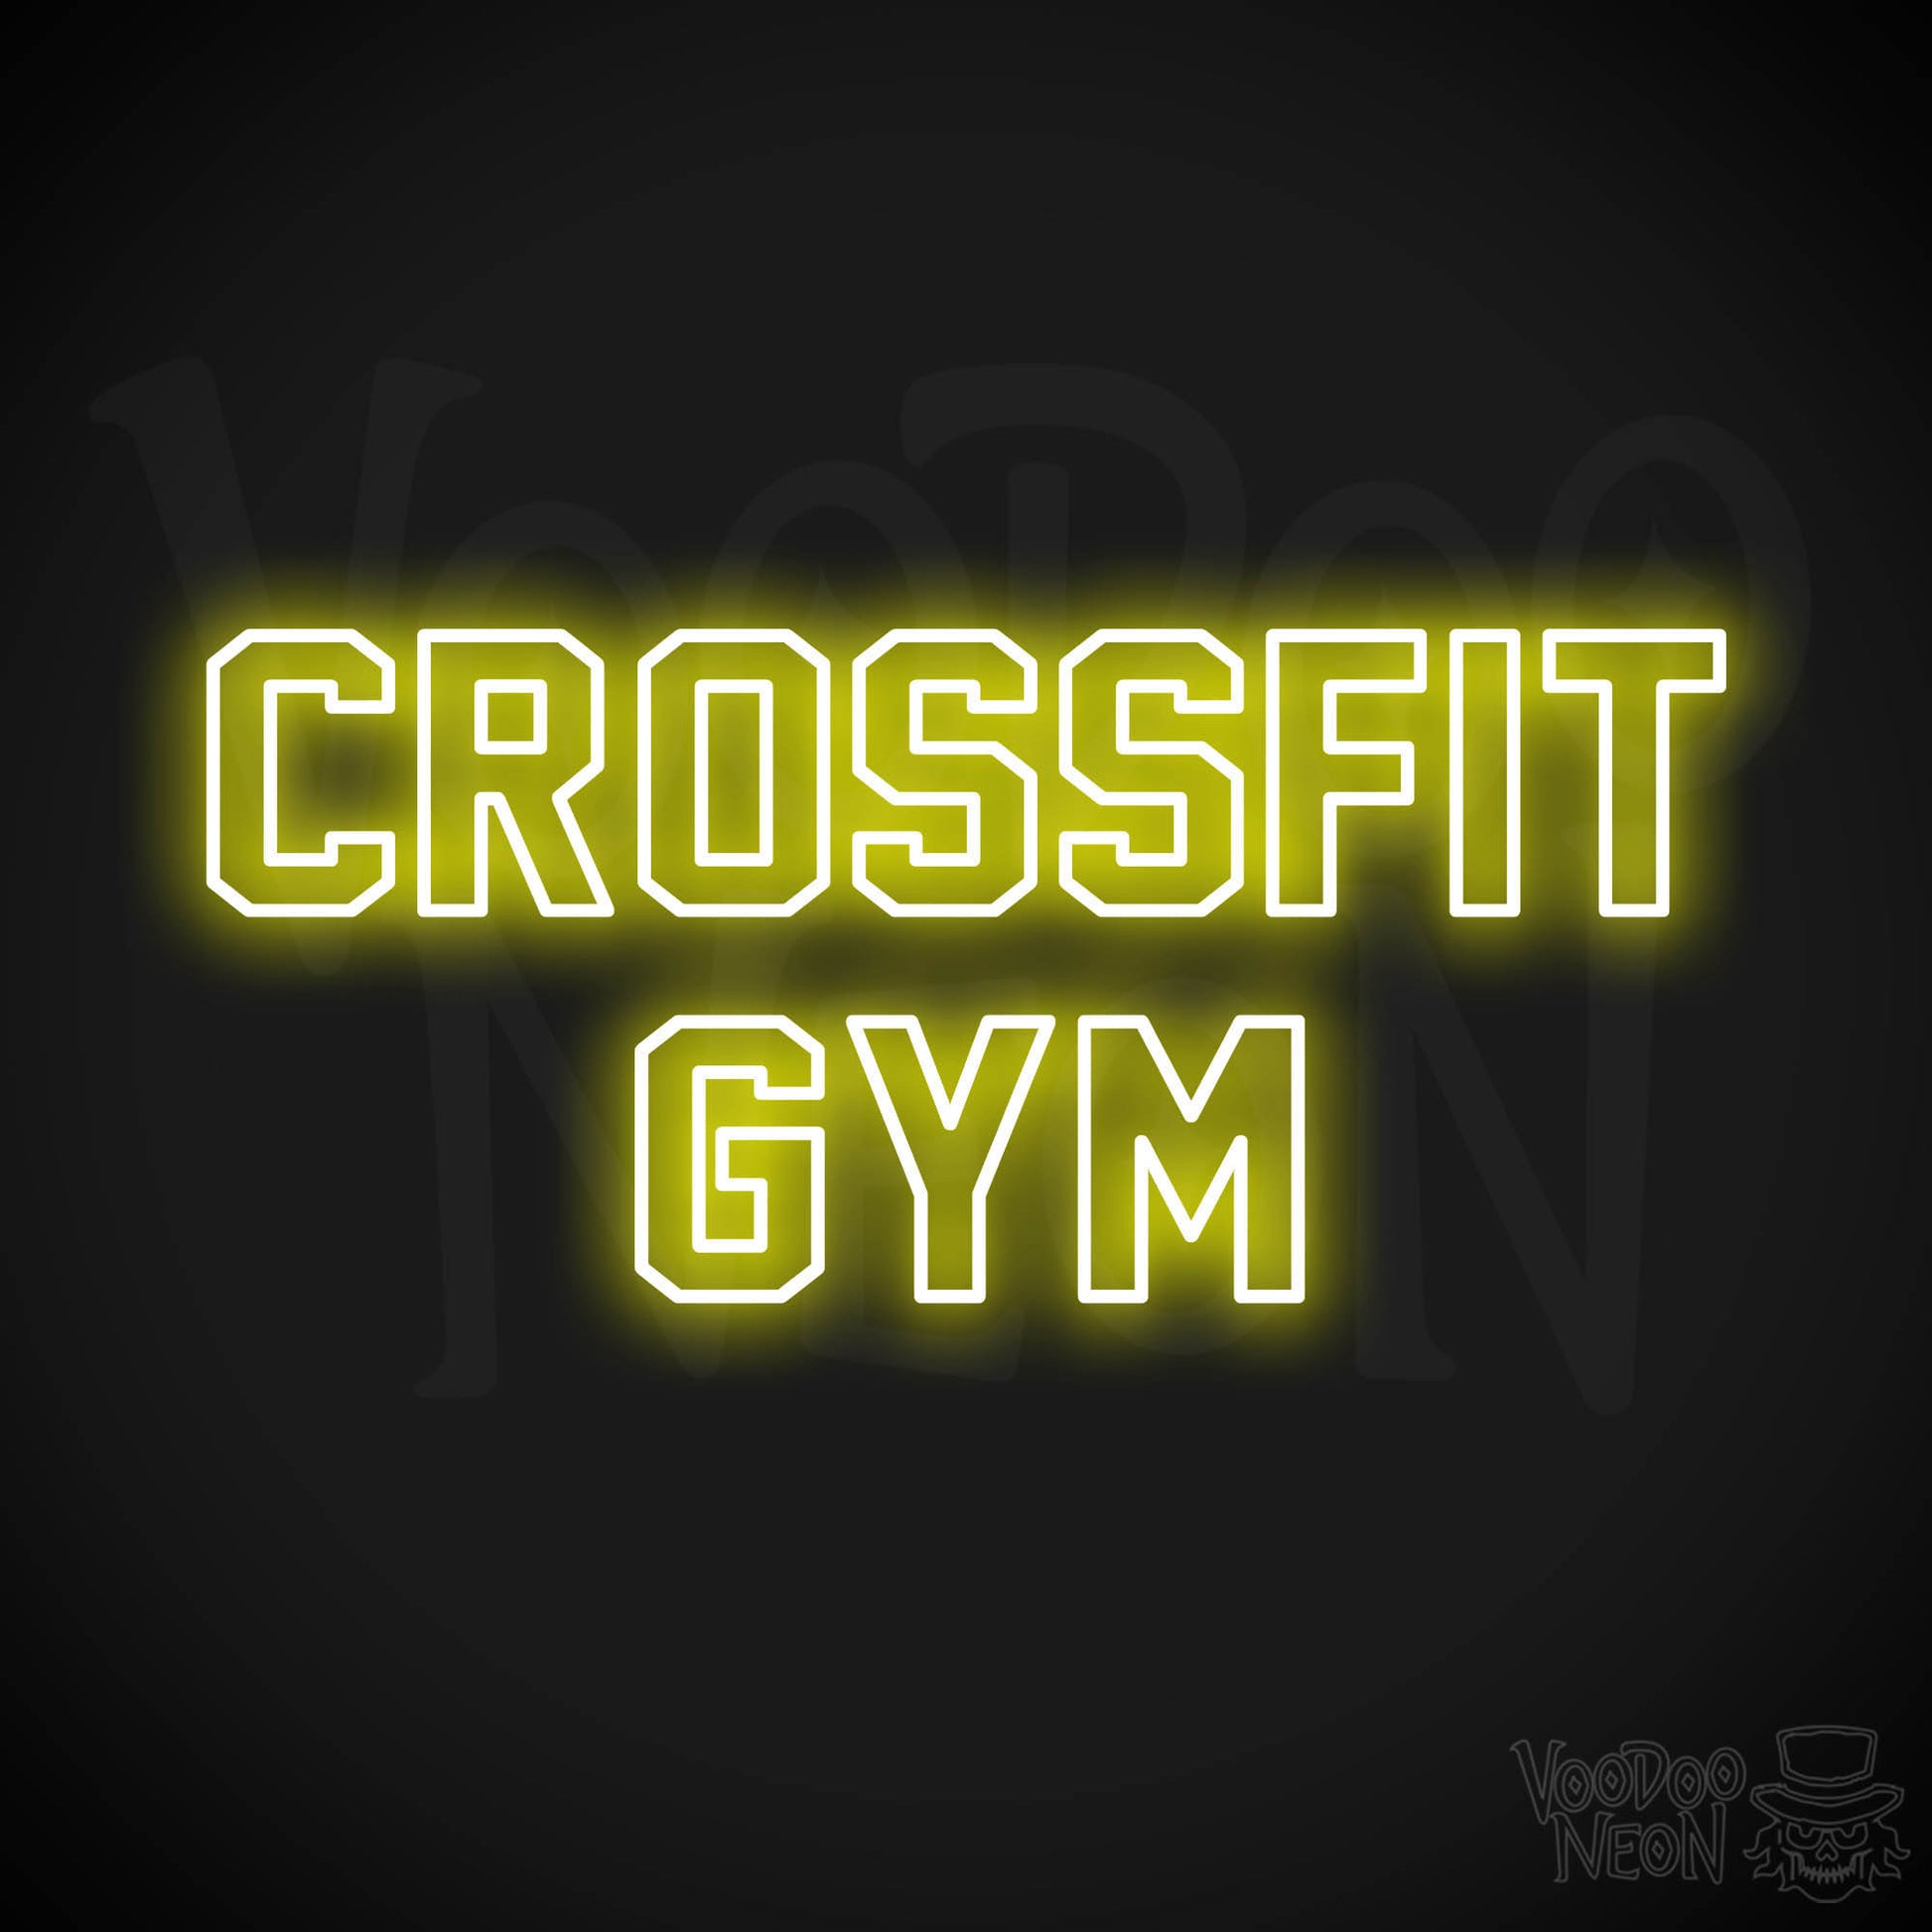 Crossfit Gym LED Neon - Yellow